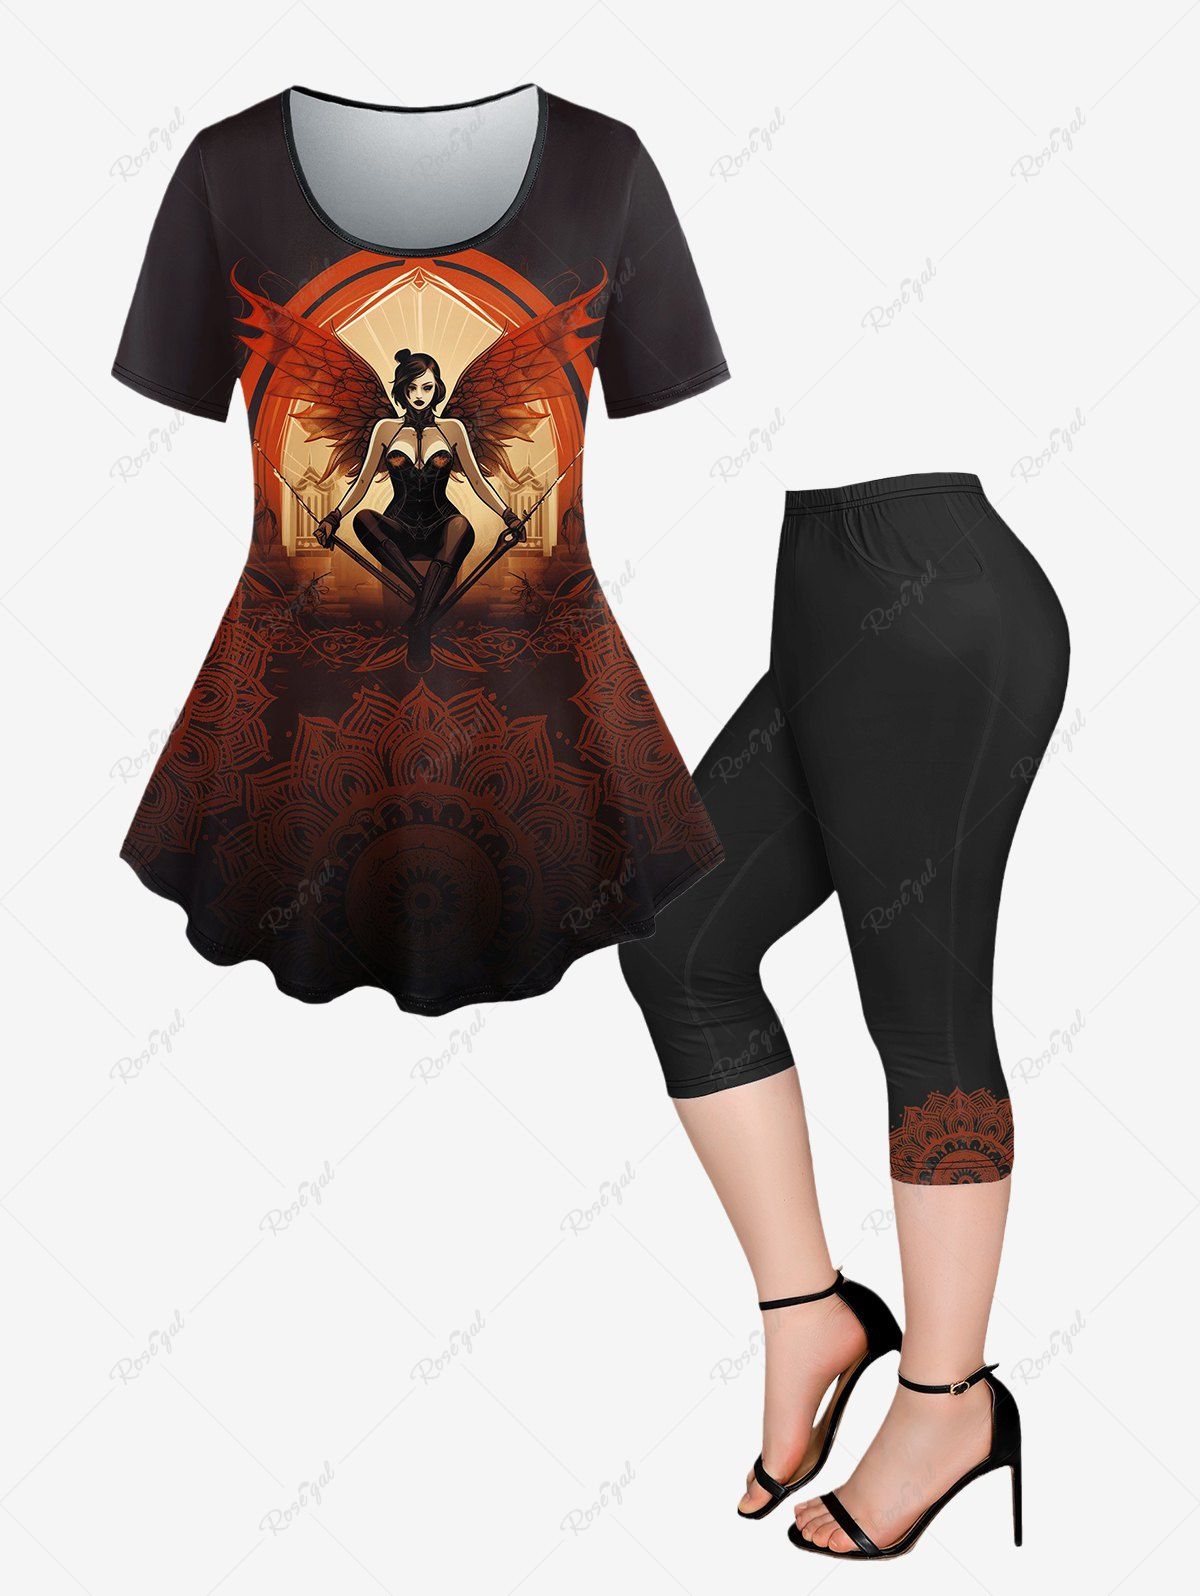 Store Gothic Paisley Figure Girl Wings Printed T-shirt and Pockets Capri Leggings Outfit  